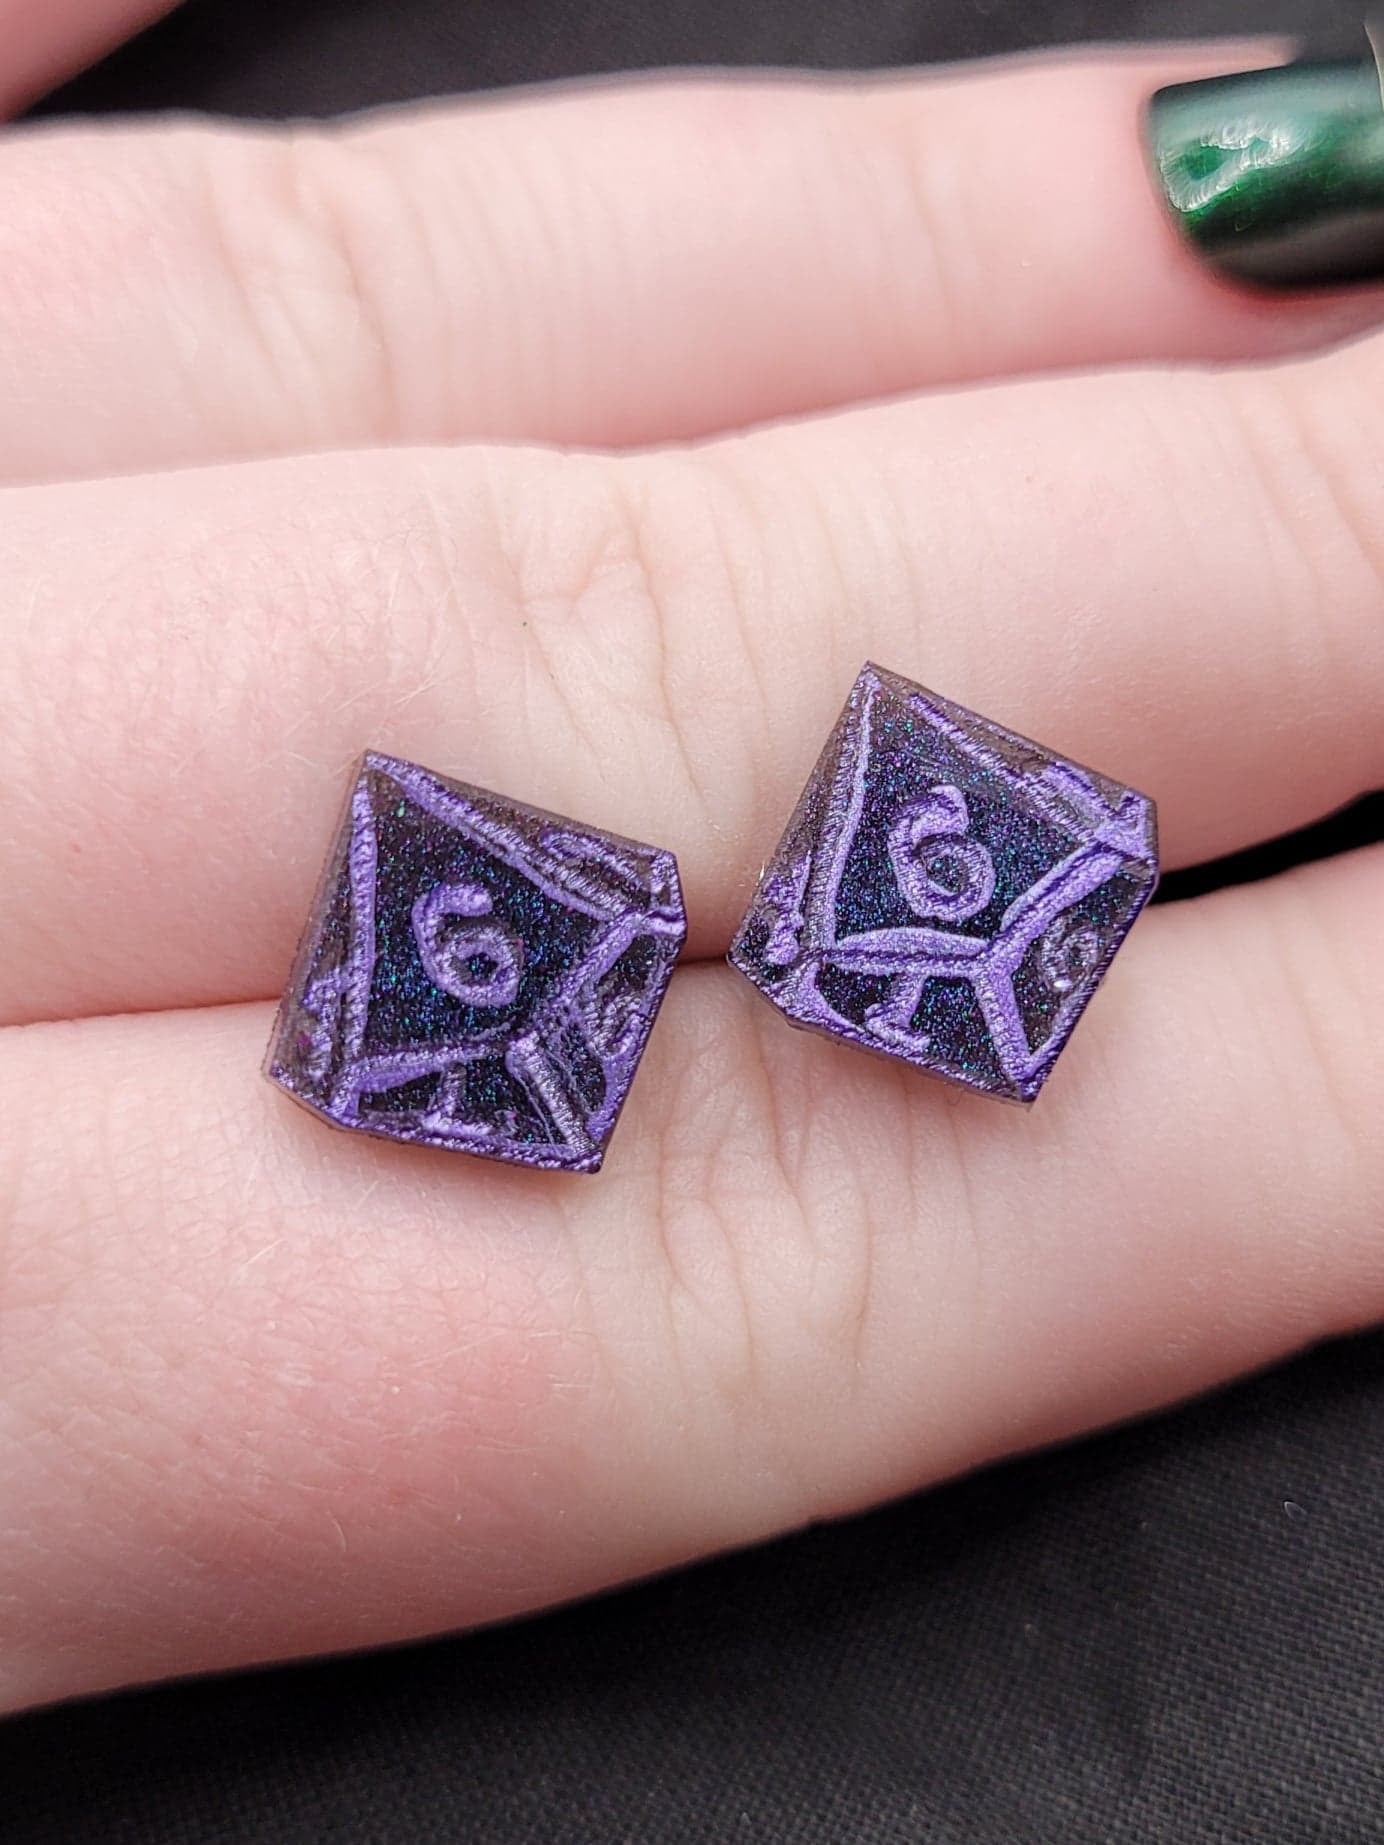 Purple and Blue Nerdy Sparkly DnD Dungeons and Dragons Multichrome Fantasy Dice Stud Resin Earrings